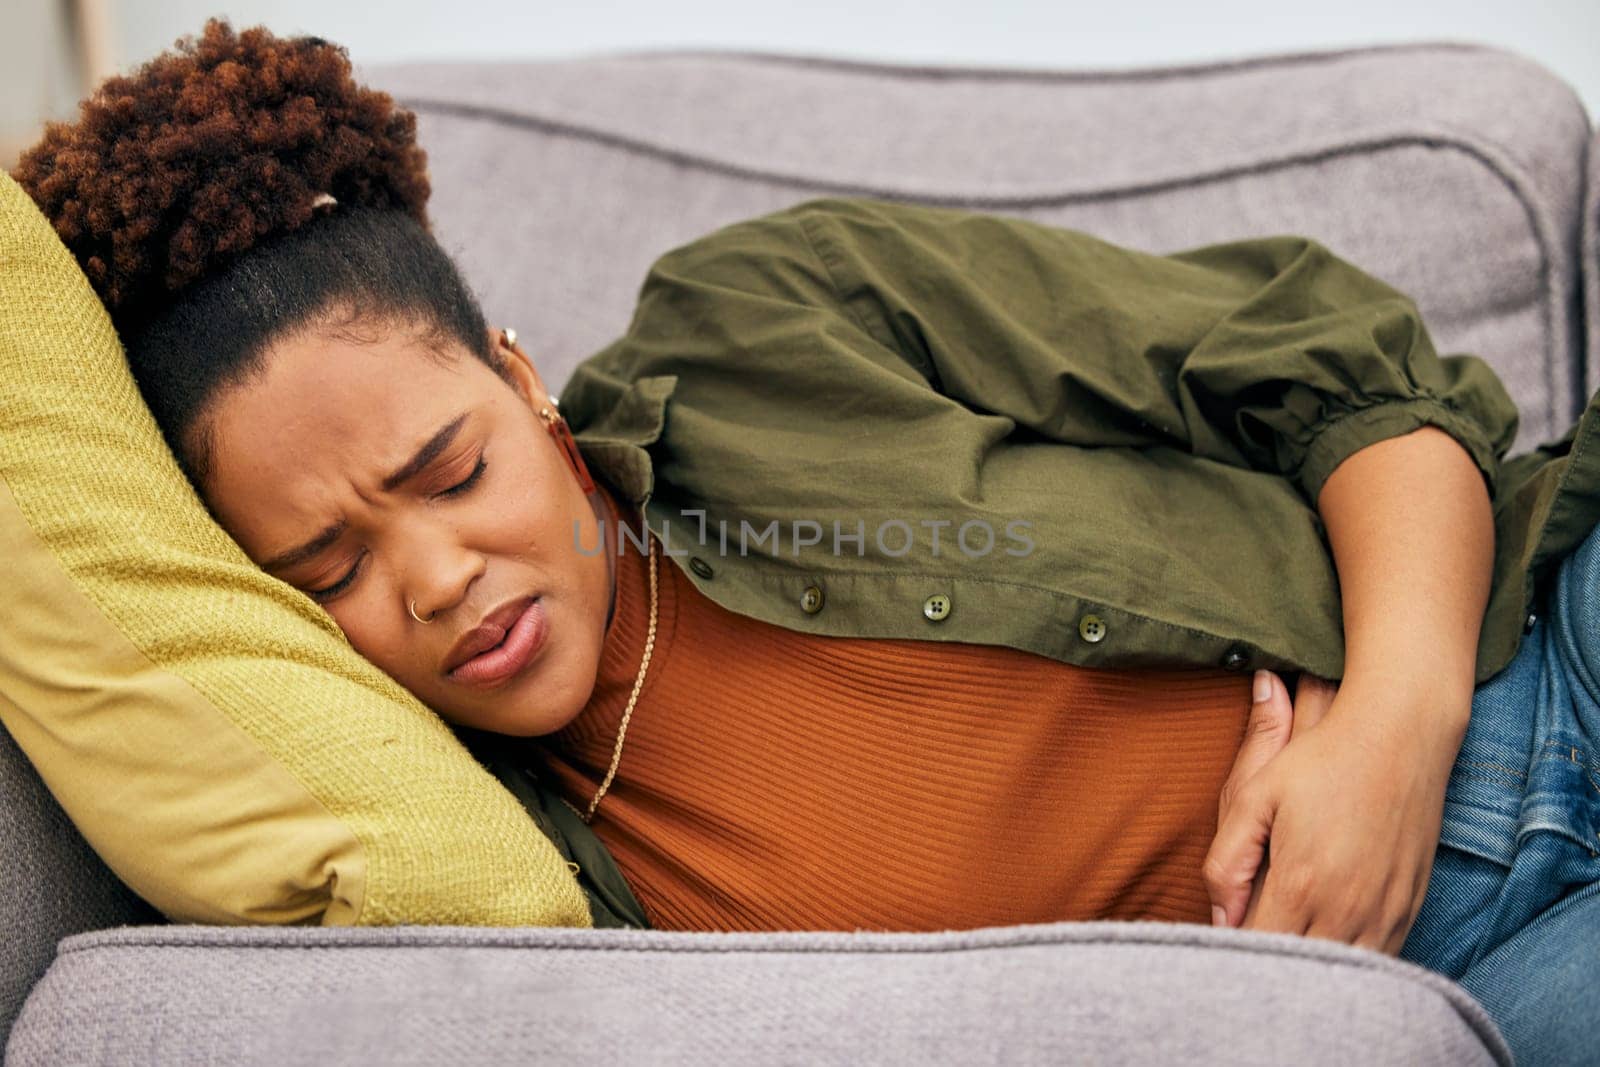 Sick woman, stomach pain and problem on sofa for ibs, health risk or nausea of gastric bloating, period cramps or virus. Black female person, menstruation or stress of constipation from endometriosis.